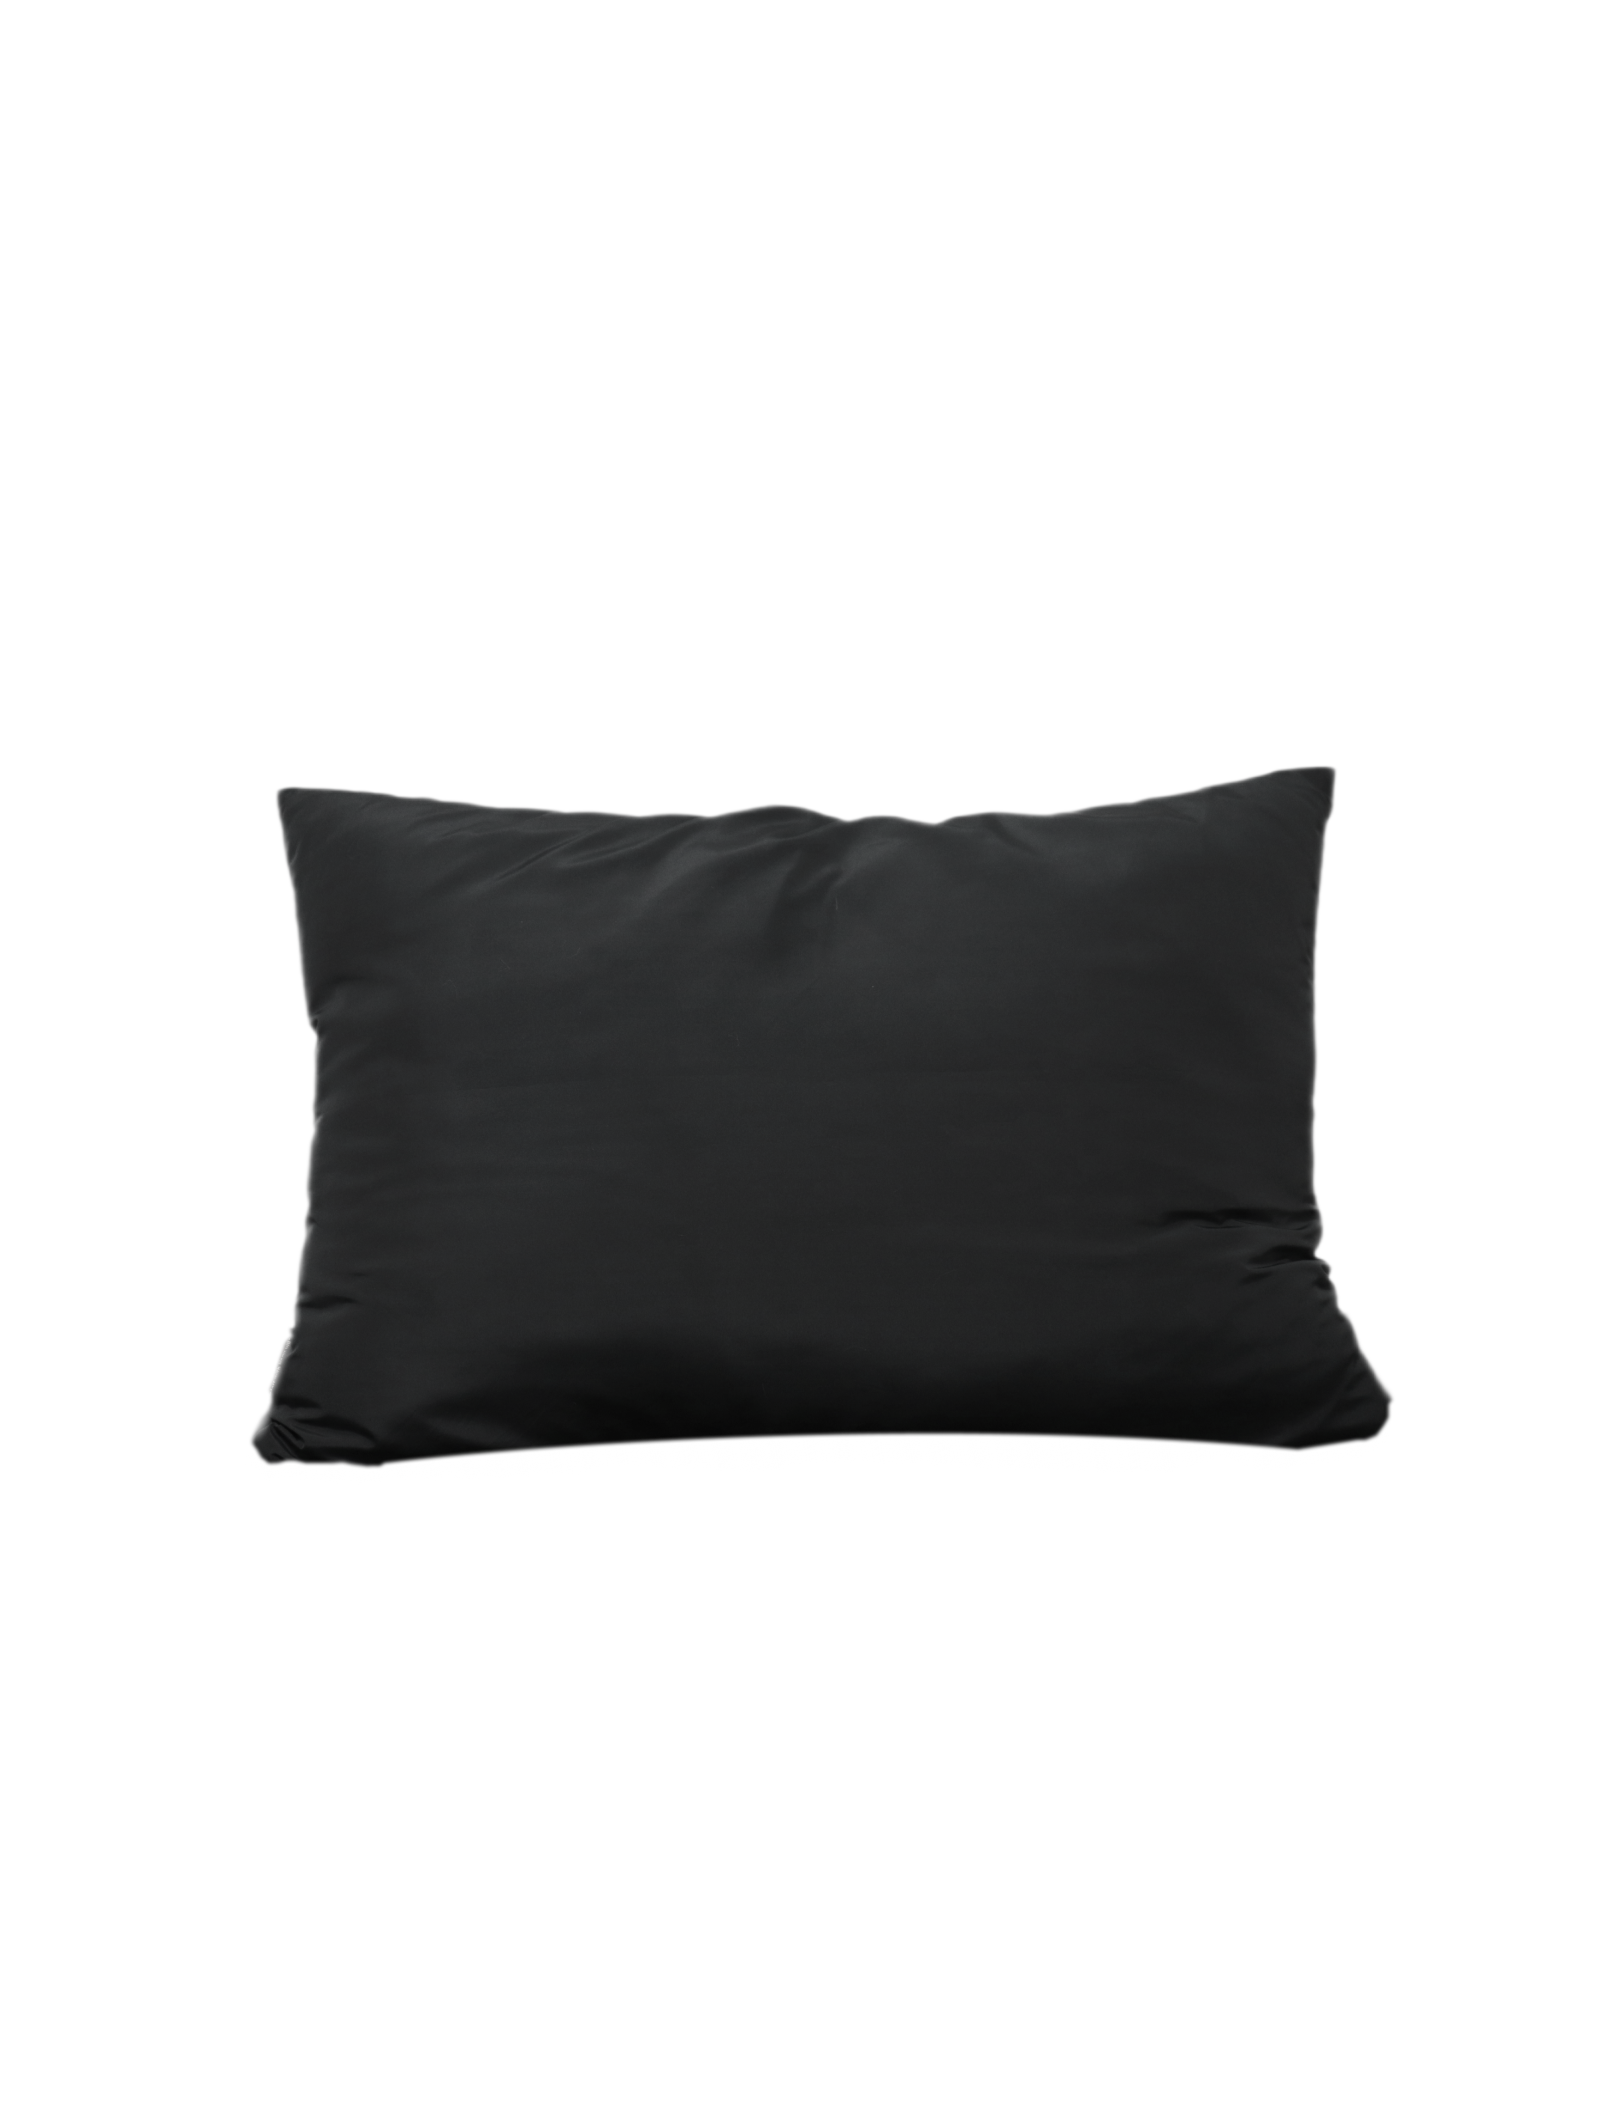 BLACK SAND PILLOW COVER